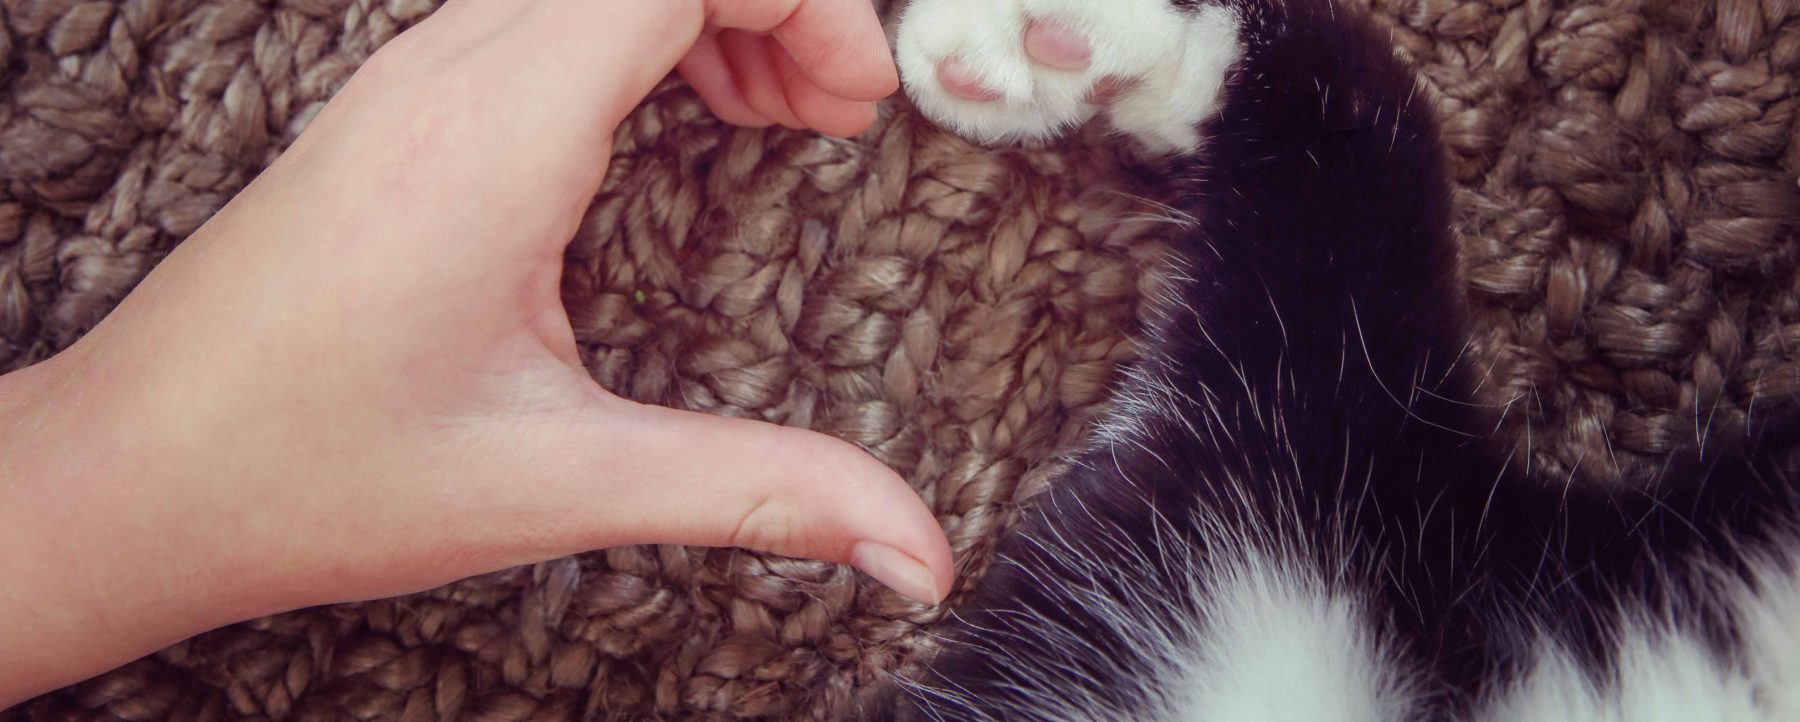 Human hand and cat paw forming the shape of a heart